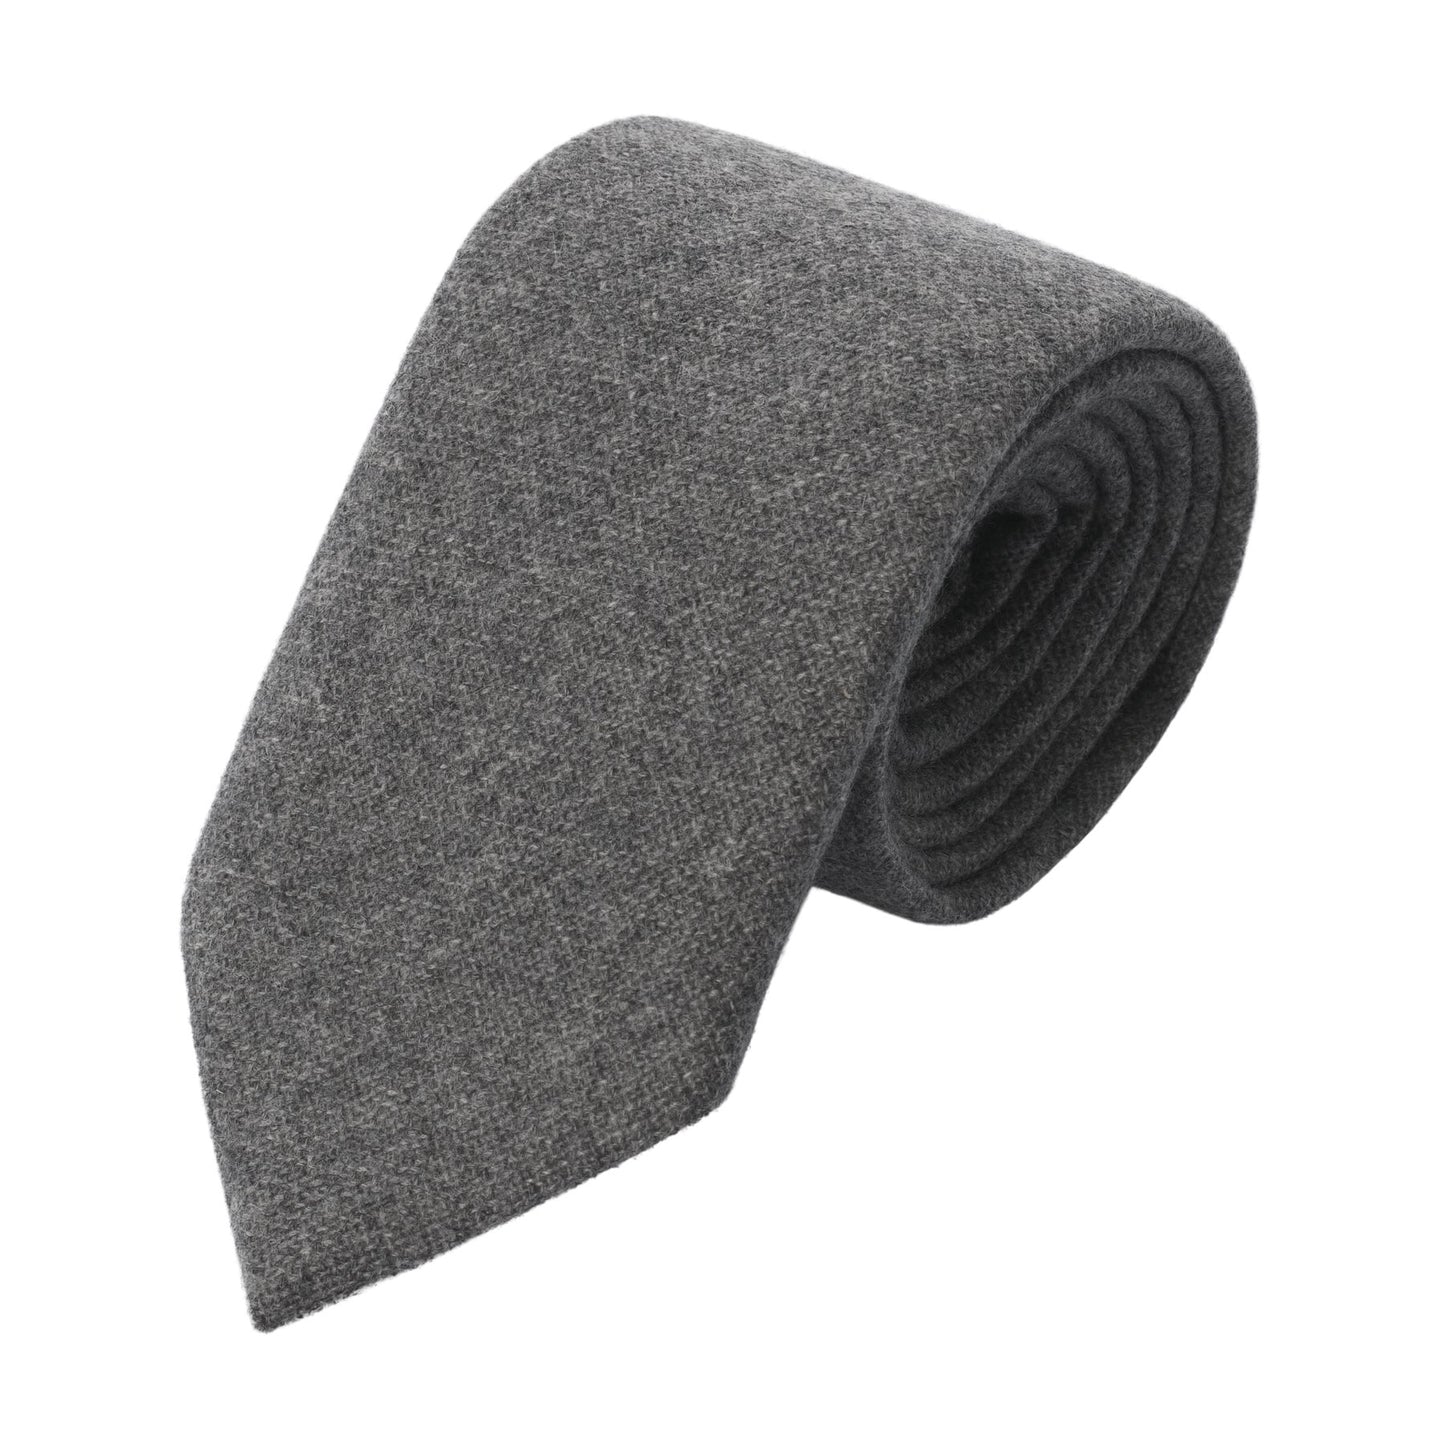 Drake's Woven Cashmere Tipped Tie in Light Grey - SARTALE